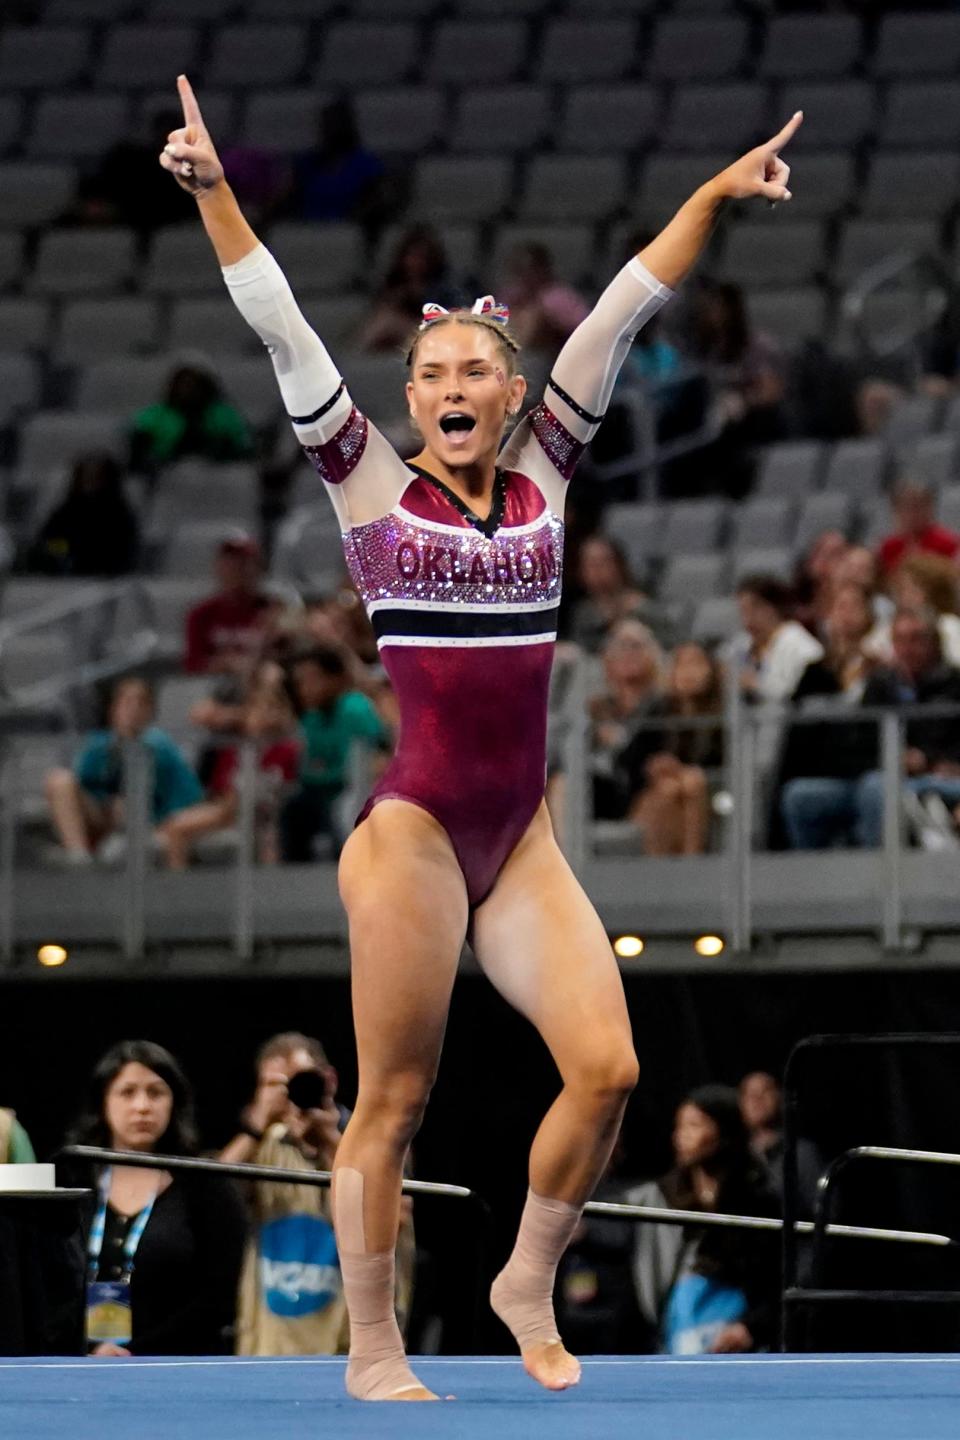 OU's Jordan Bowers celebrates after competing in the floor exercise during the semifinals on Thursday.